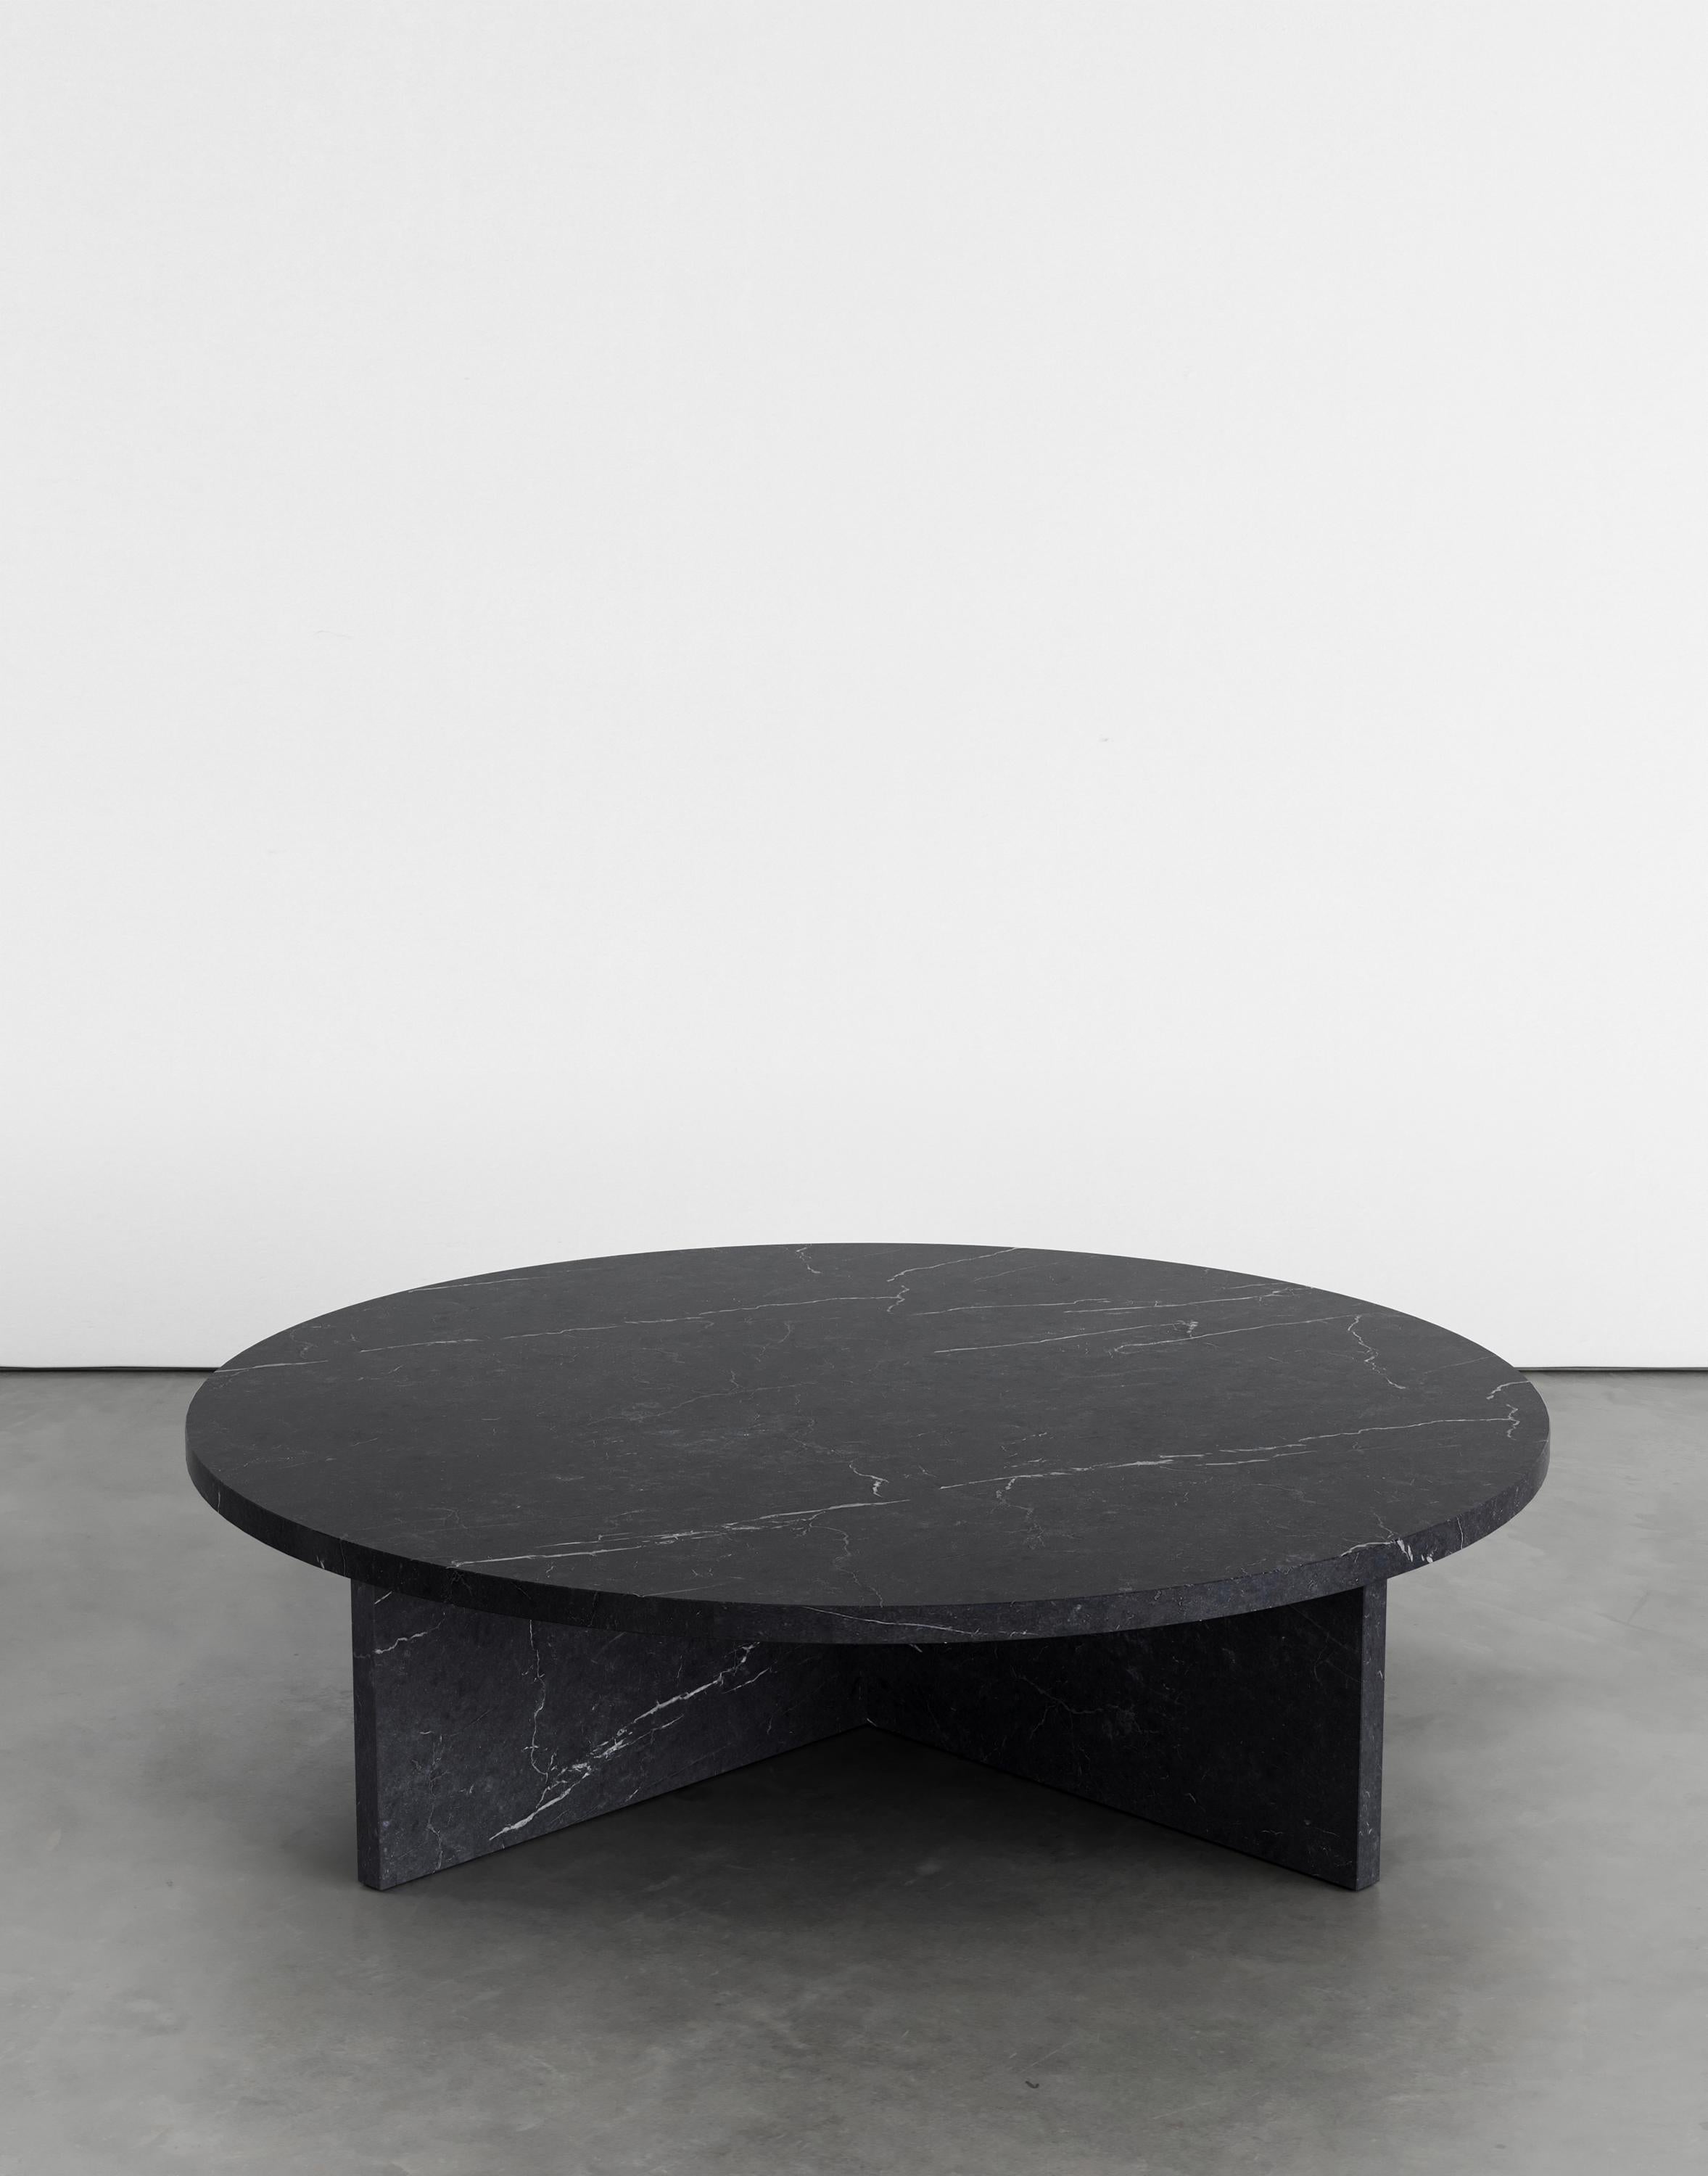 Rosa 120 coffee table by Agglomerati
Dimensions: D 120 x H 30 cm
Materials: Nero Marquina marble.
Available in other stones.

Rosa Coffee Table celebrates simplicity. It has striking geometric proportions that generate a harmonious